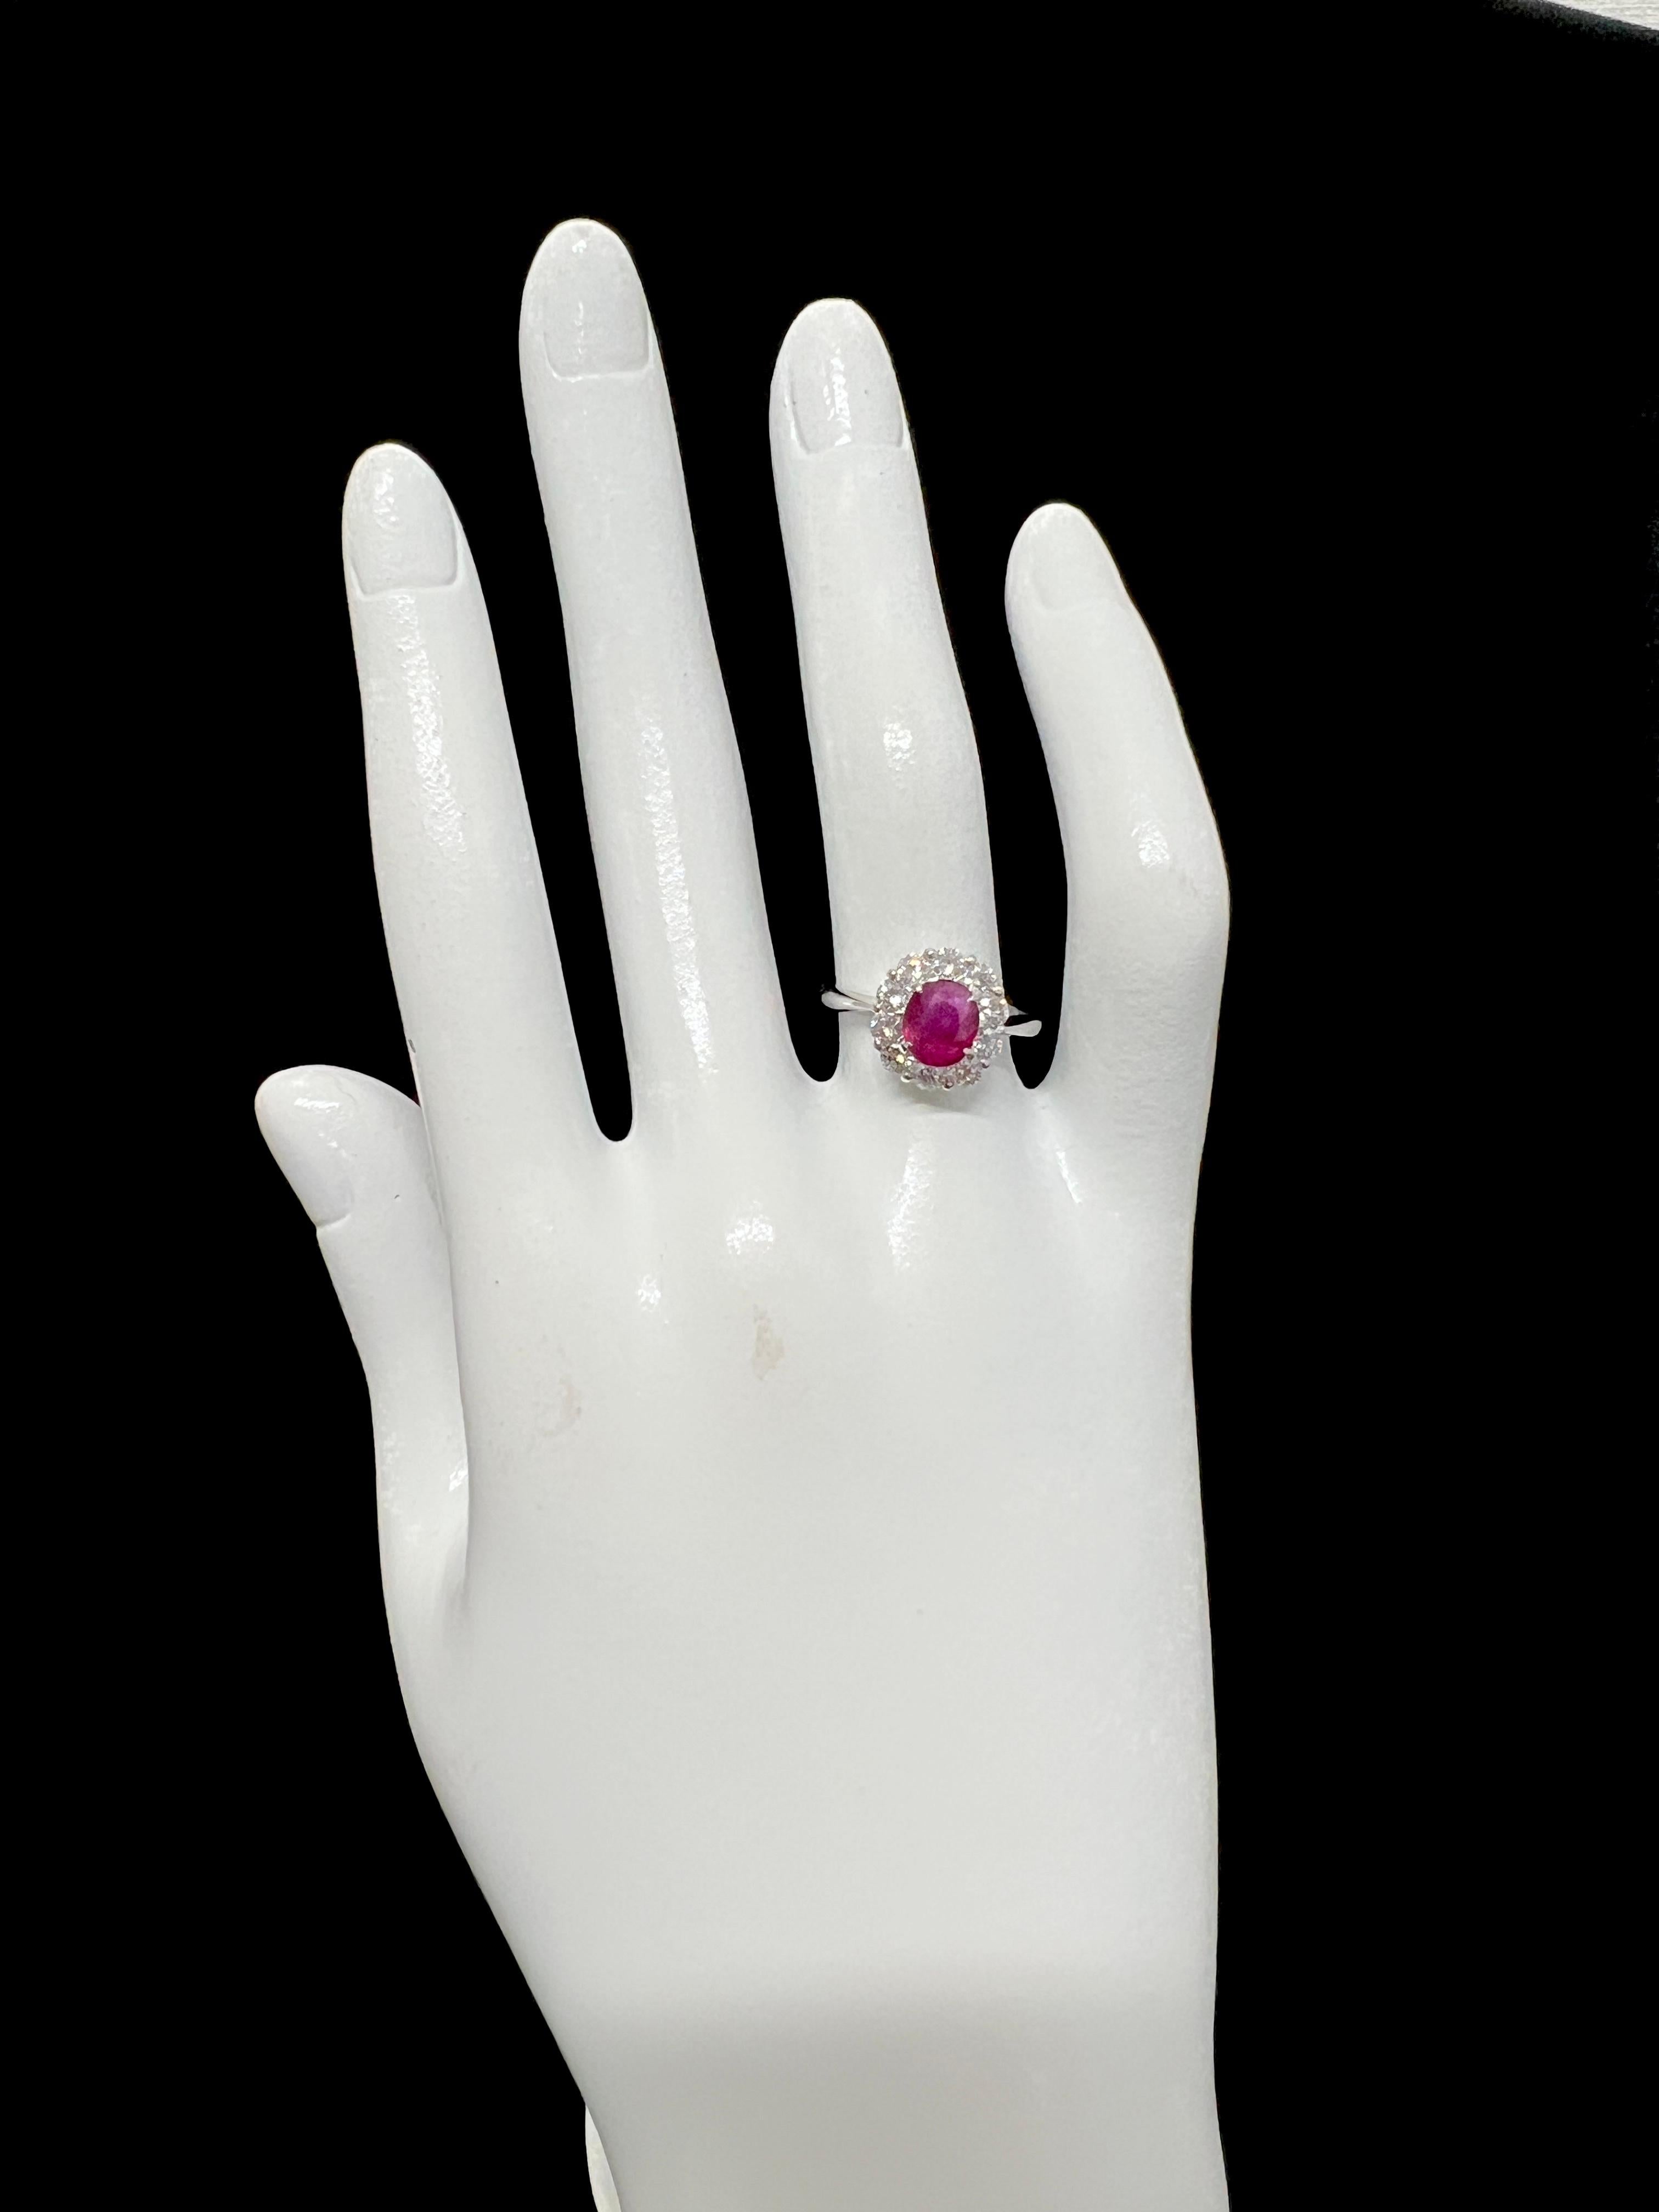 AIGS Certified 1.39 Carat Untreated Ruby and Diamond Ring Made in Platinum For Sale 1